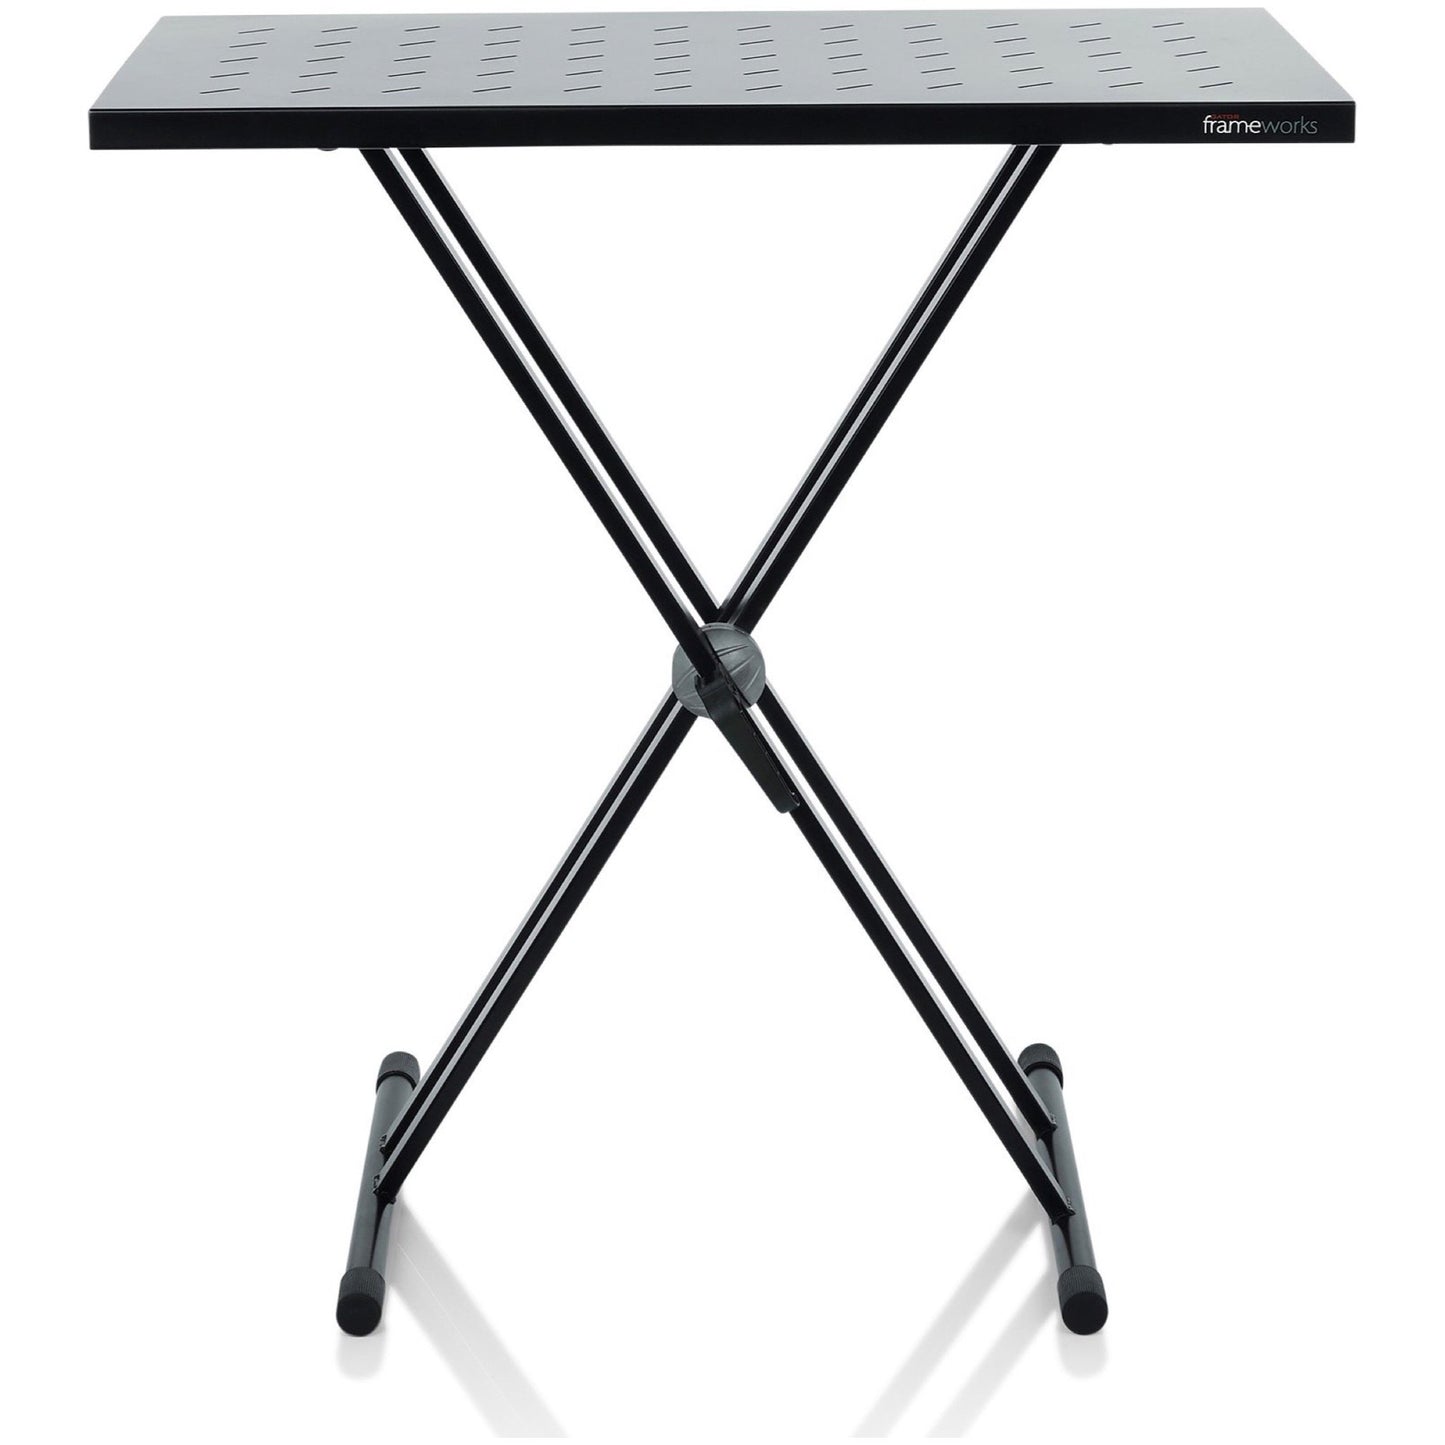 Gator Utility Table Top and InchX Inch-Style Stand Set